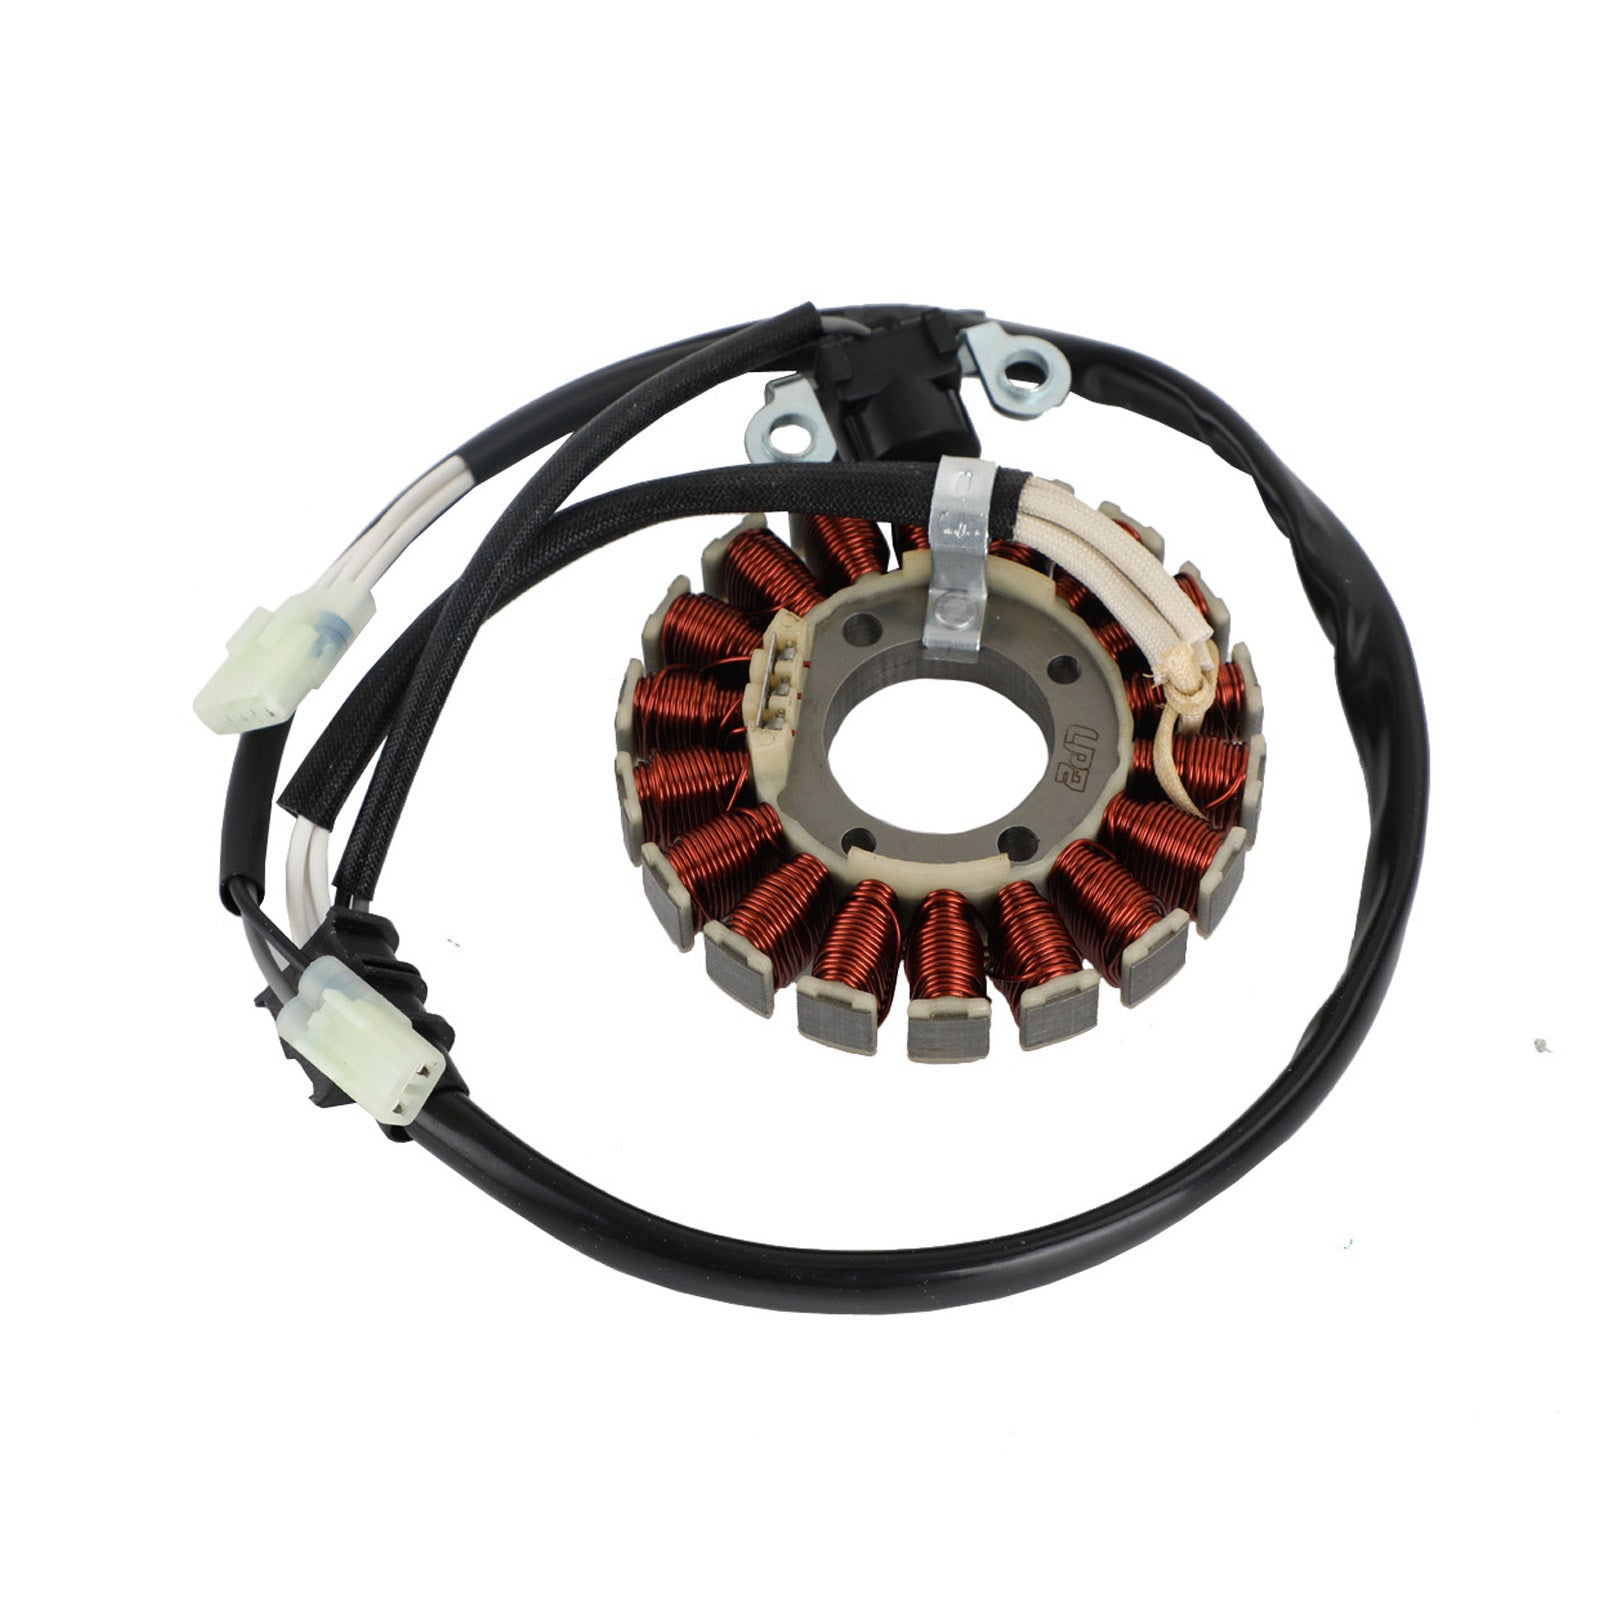 Magneto Stator+Voltage Rectifier+Gasket For Yamaha WR450F WR 450 F 2012-2015 Generic Fedex Express Shipping